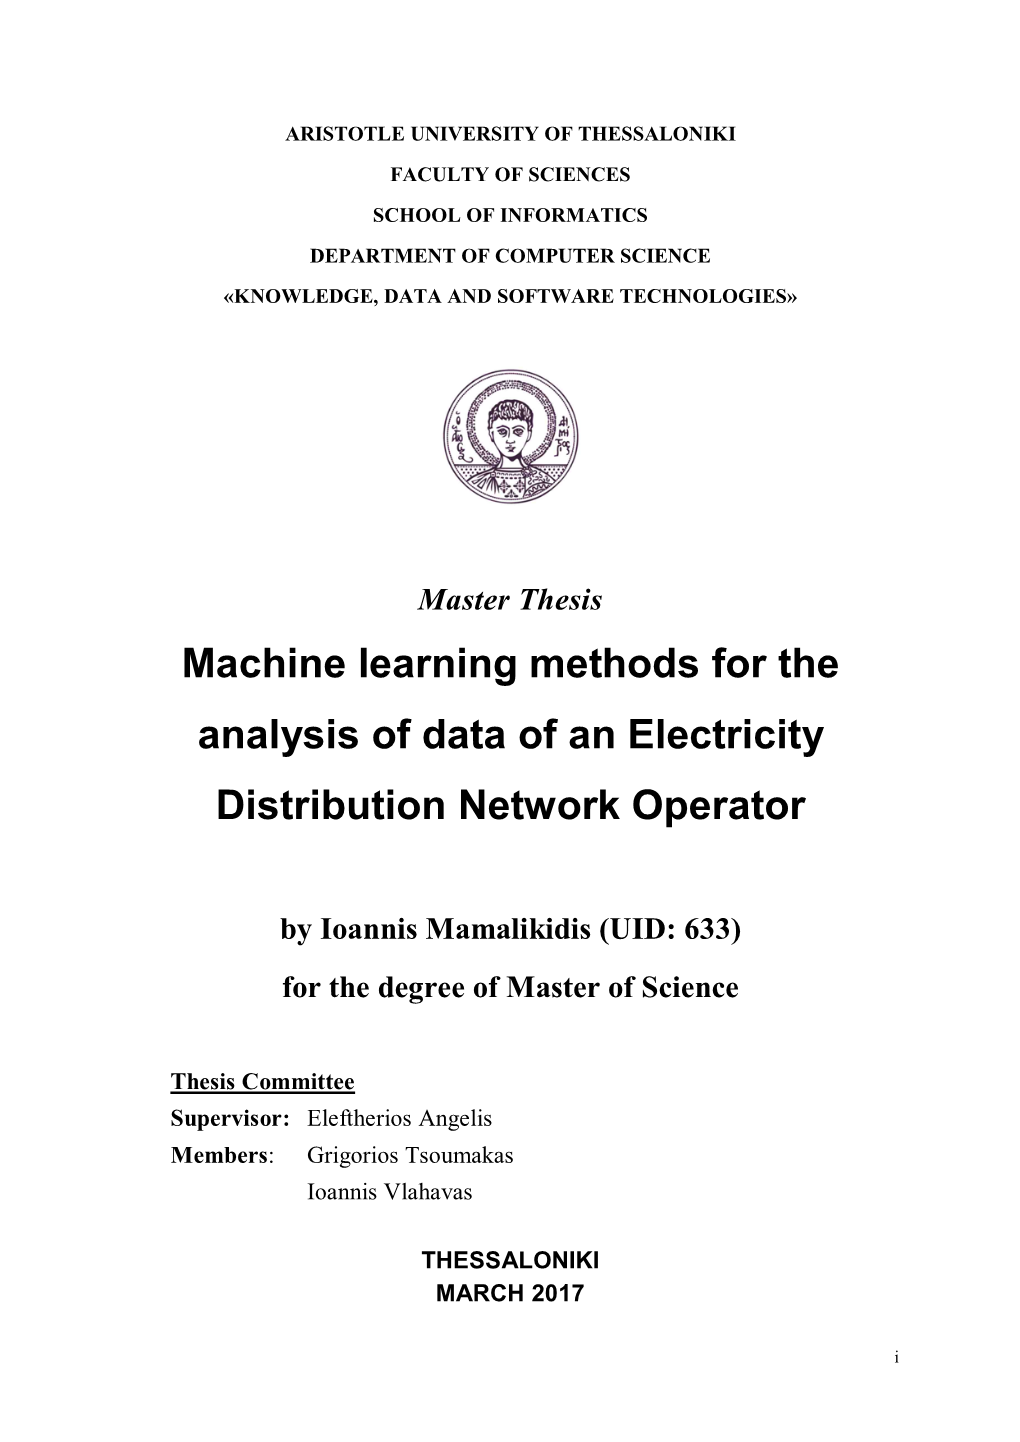 Machine Learning Methods for the Analysis of Data of an Electricity Distribution Network Operator